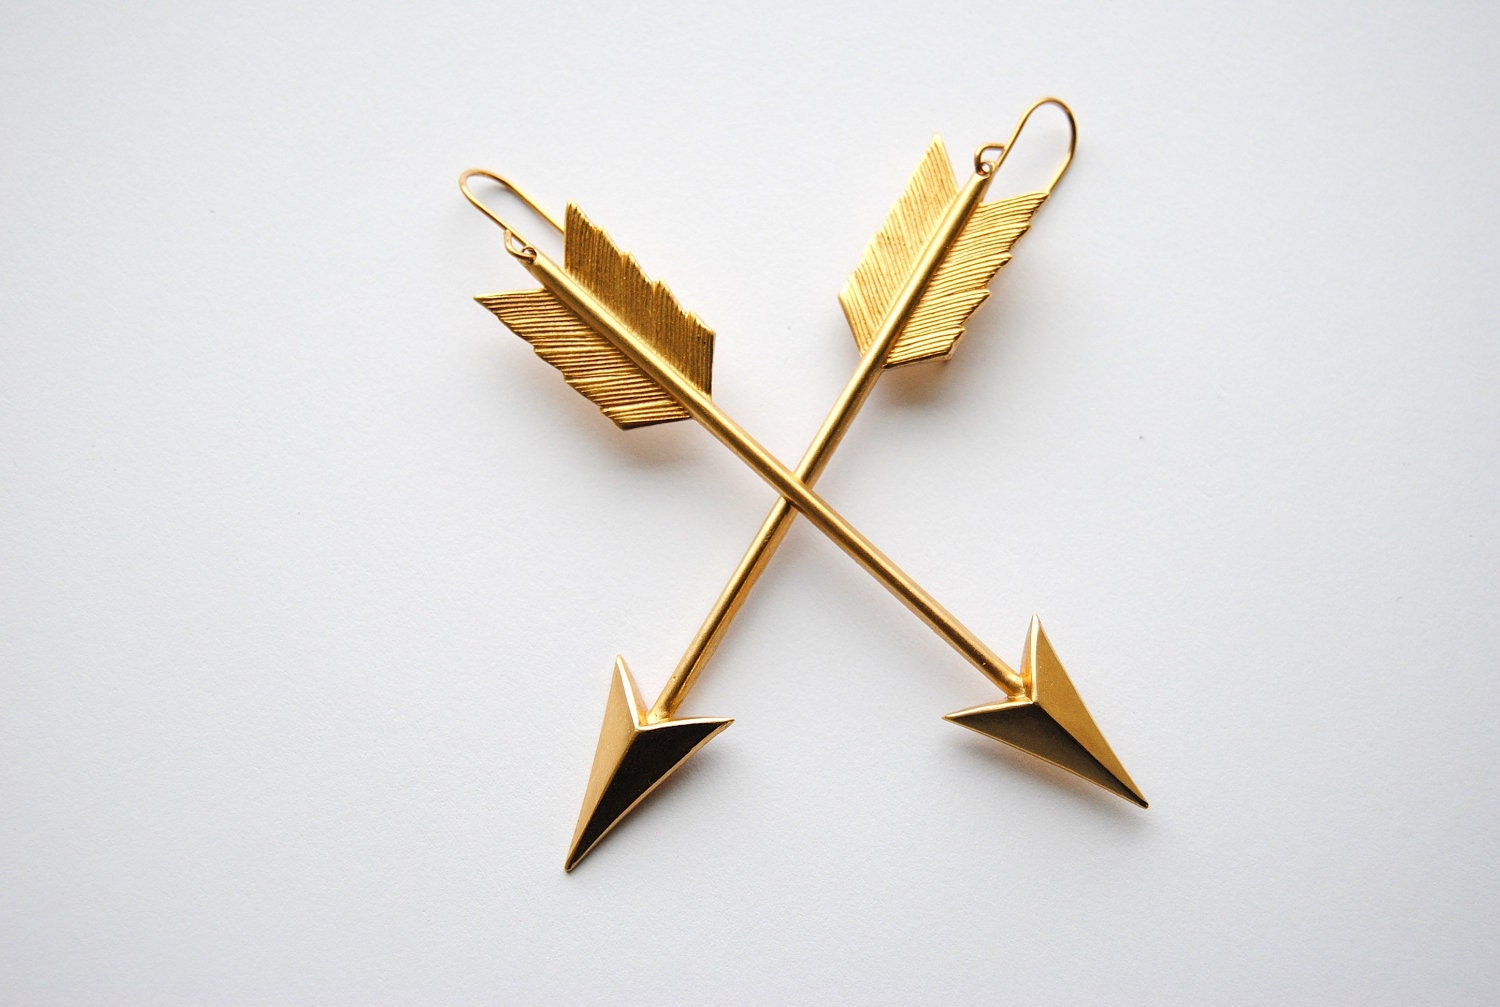 Cupid's Arrow Earrings - Handmade Jewelry - Free Shipping in the US - Valentine's Day Jewelry